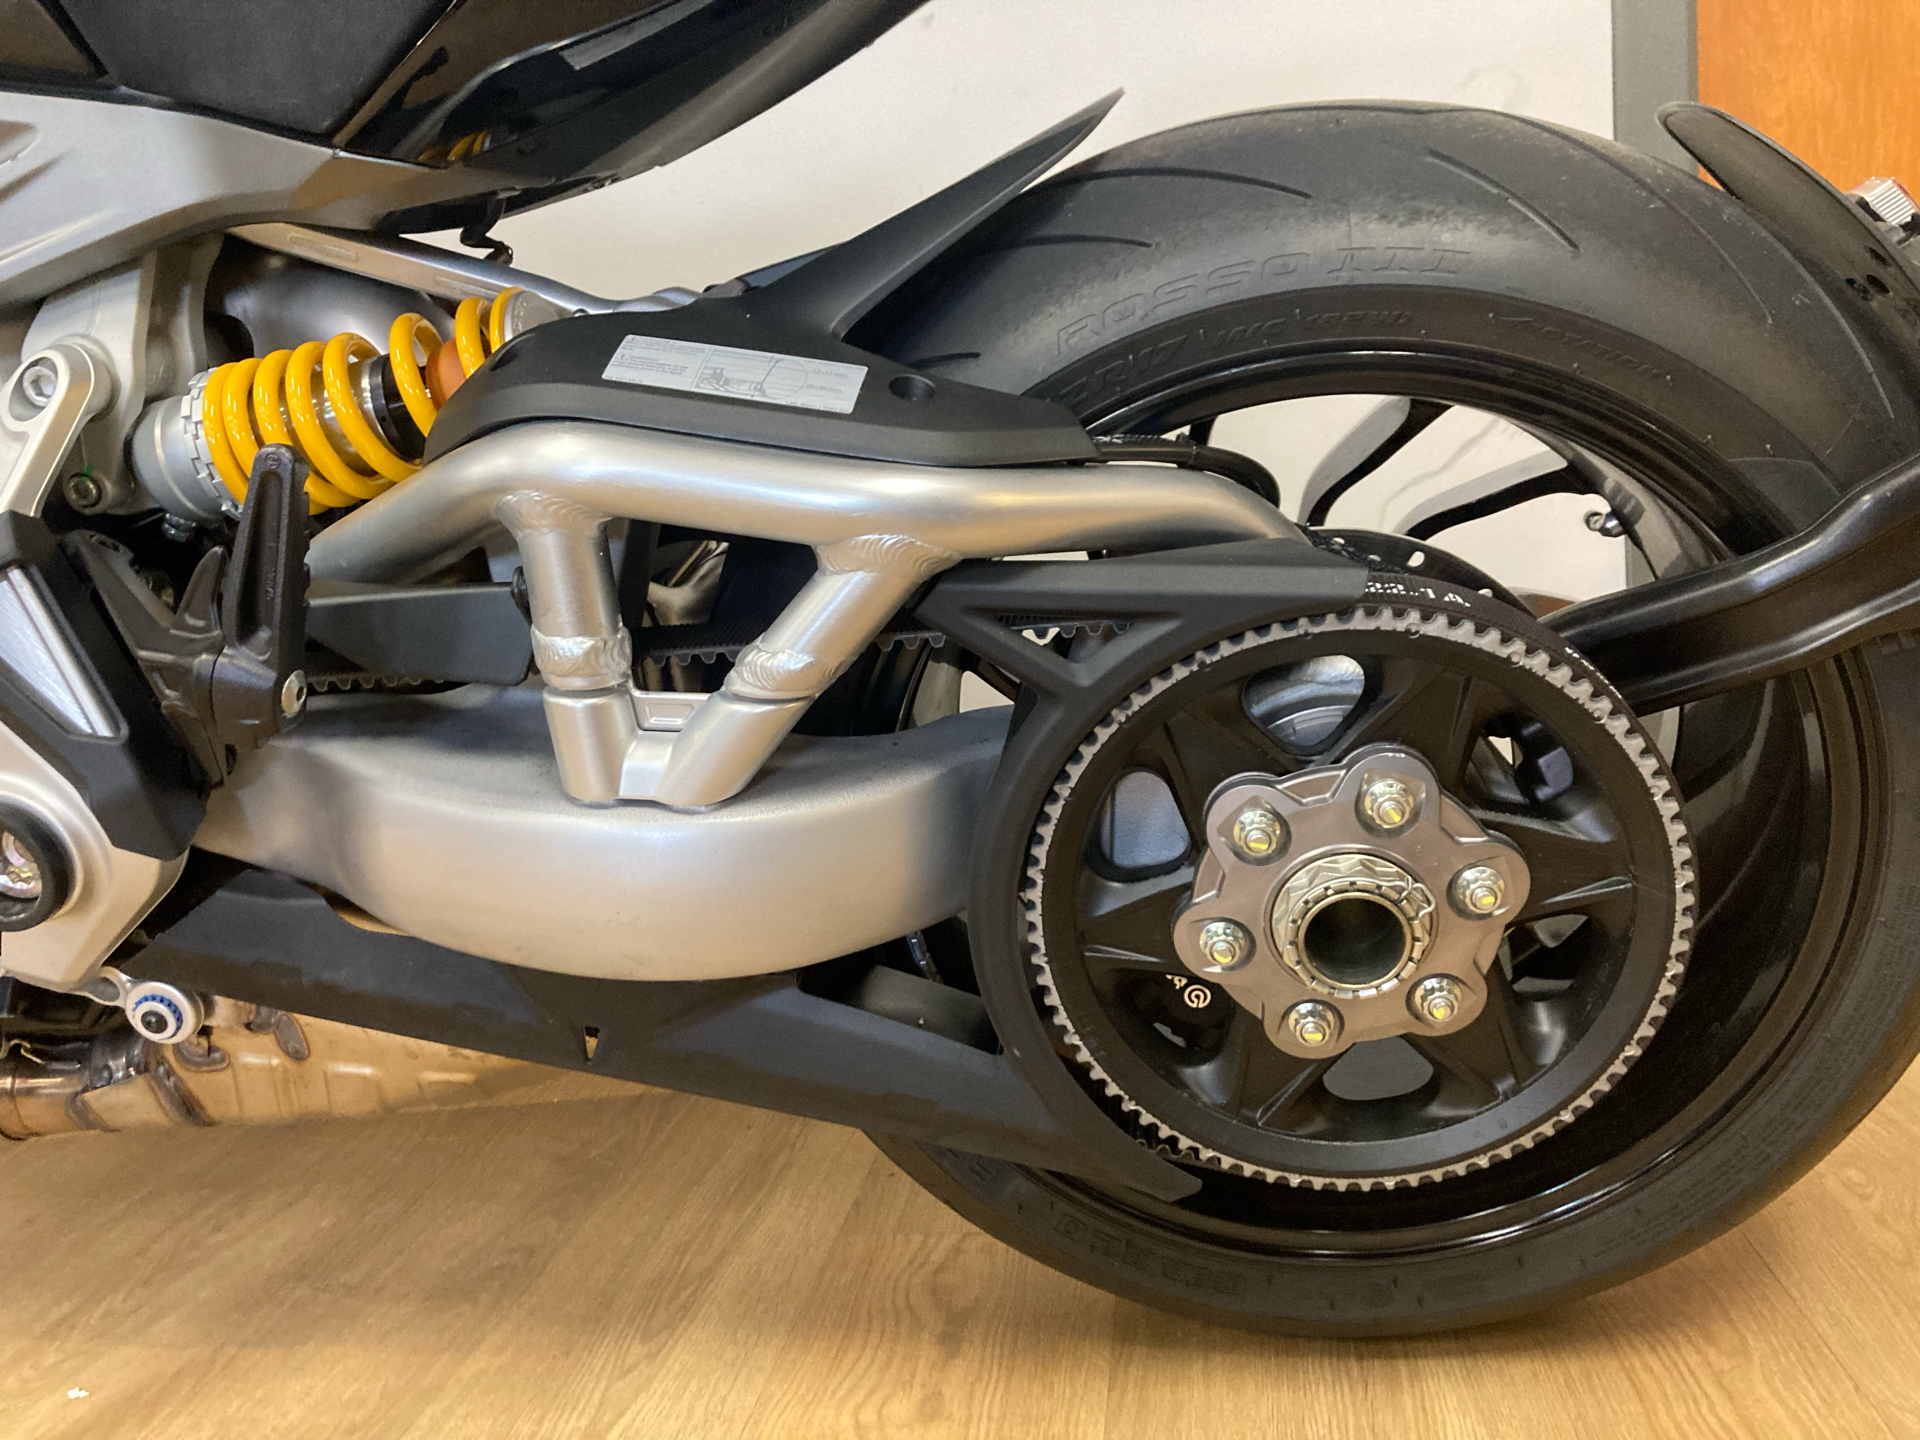 2022 Ducati XDiavel S in Mahwah, New Jersey - Photo 8